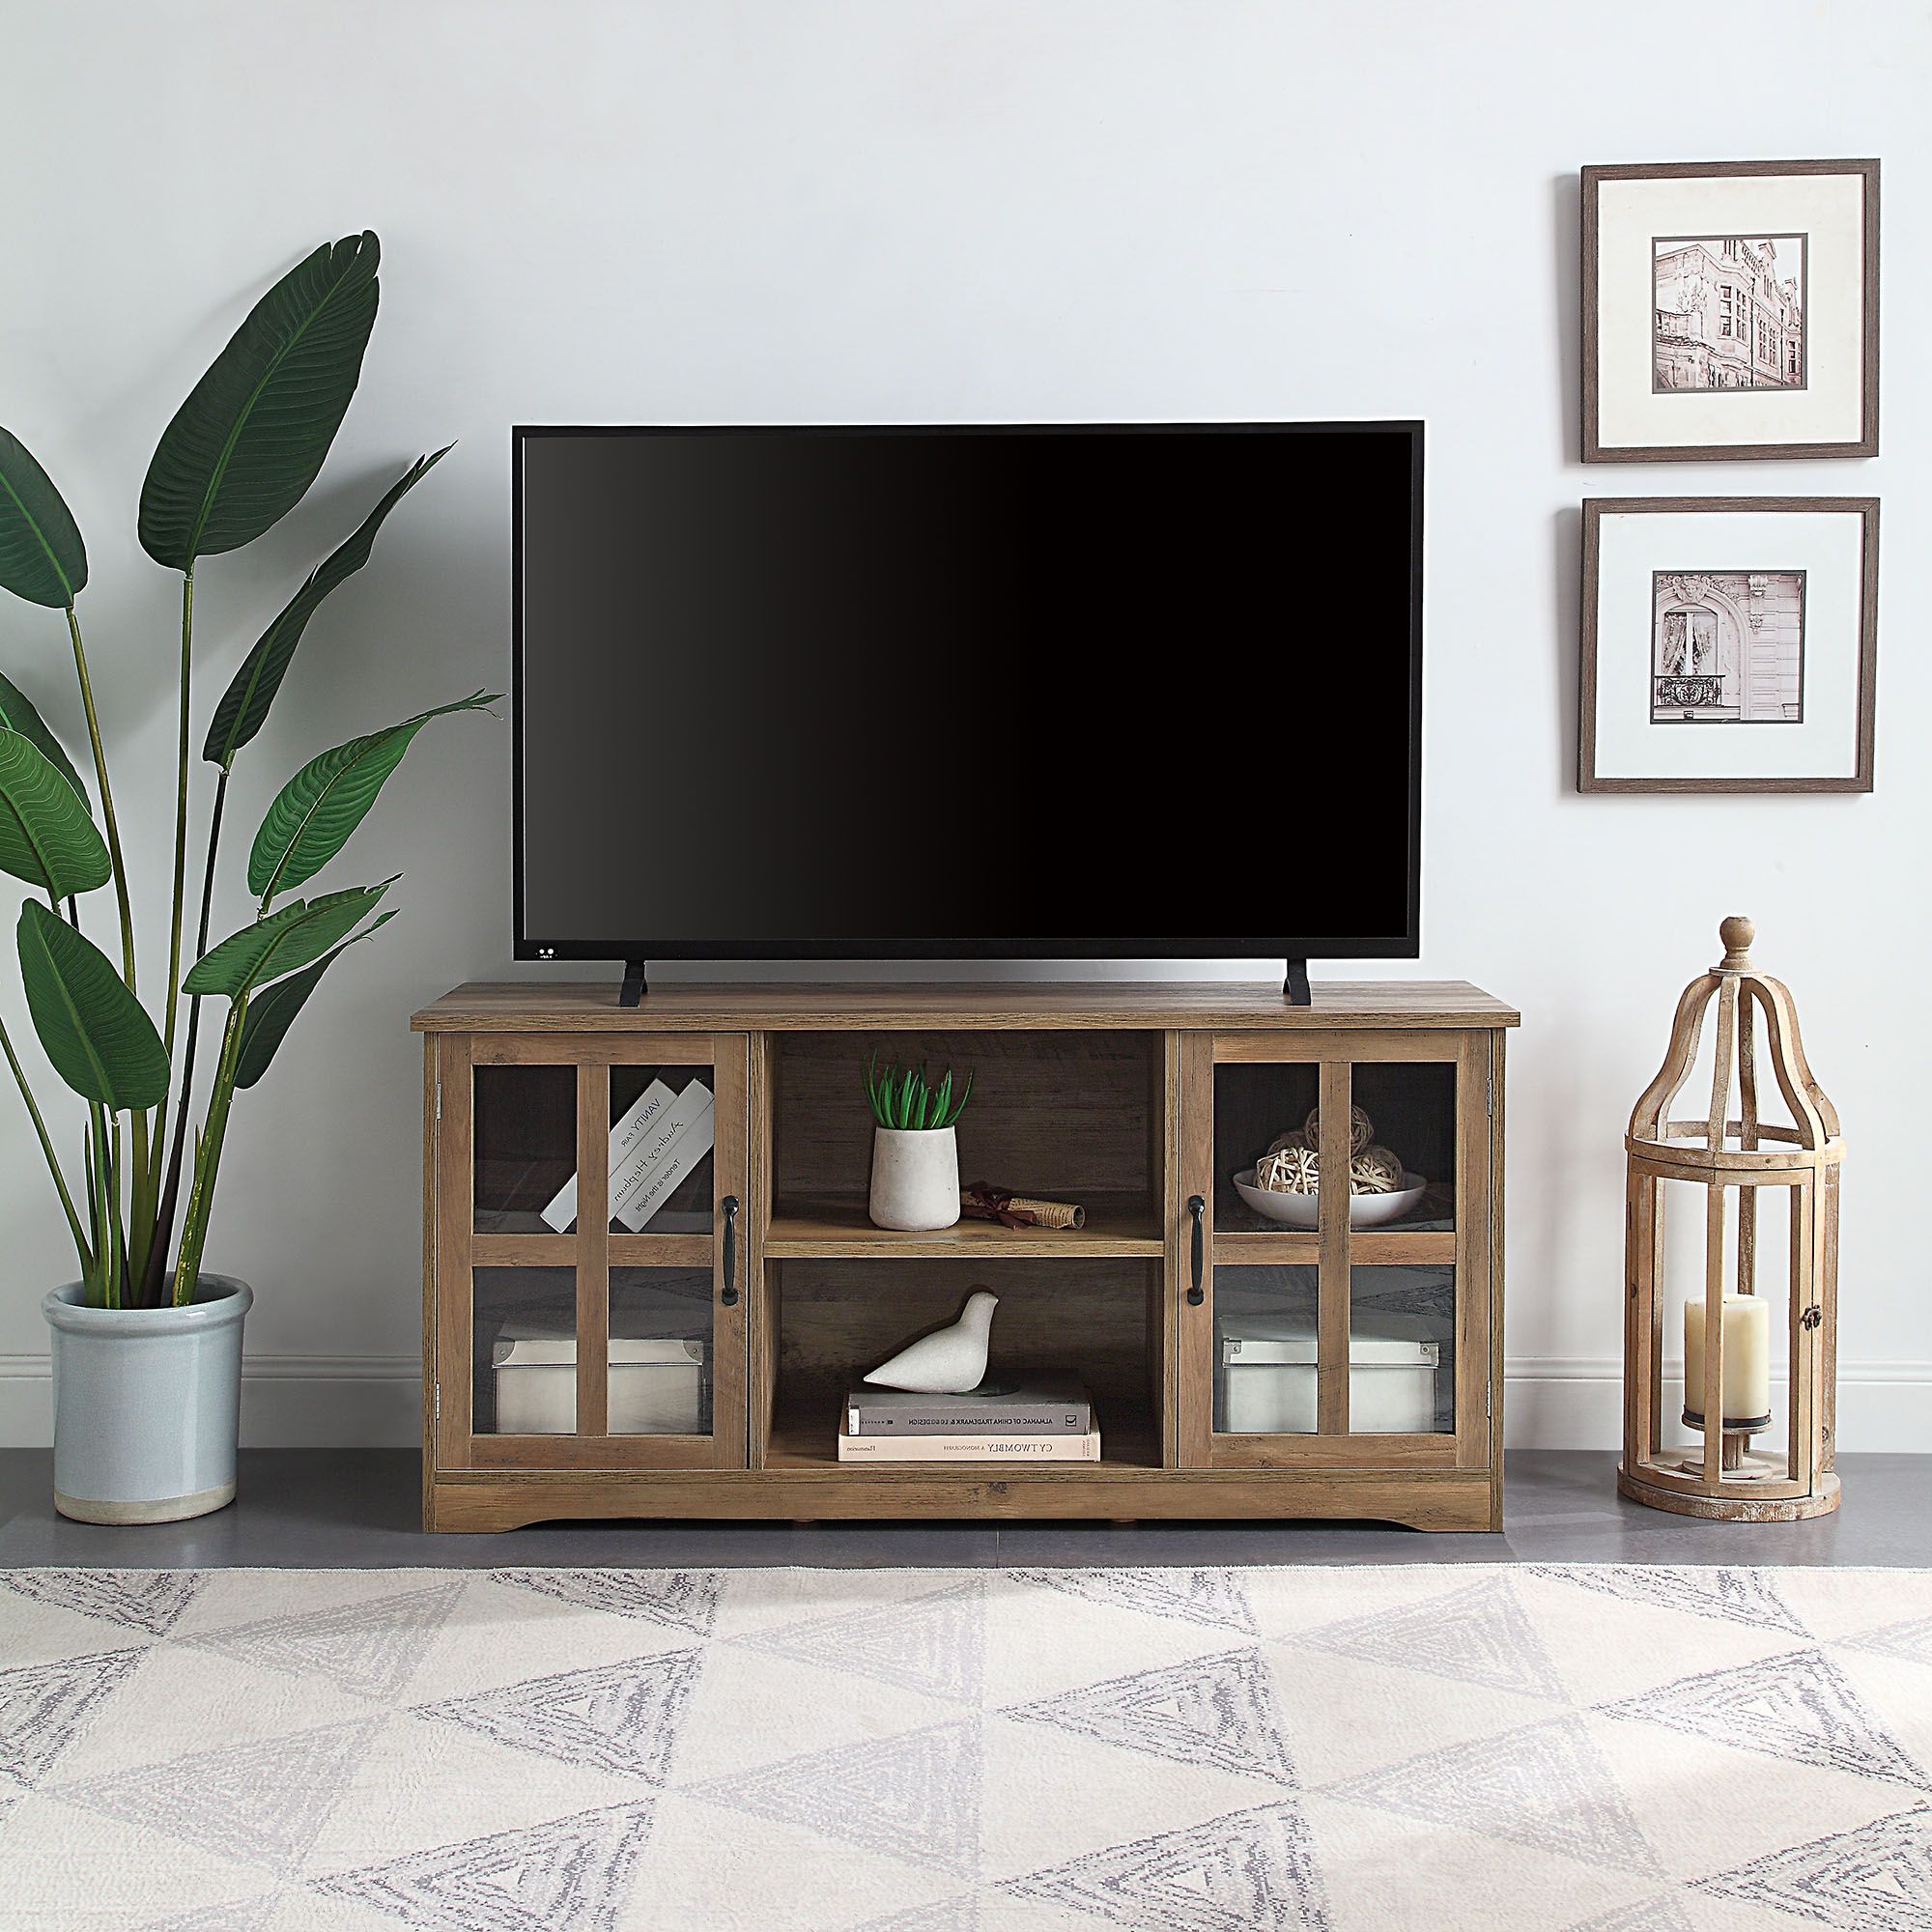 Newest Belleze Cori 52 Inch Tv Stand Wood And Glass Console For Inside Glass Shelves Tv Stands For Tvs Up To 60" (Photo 1 of 10)